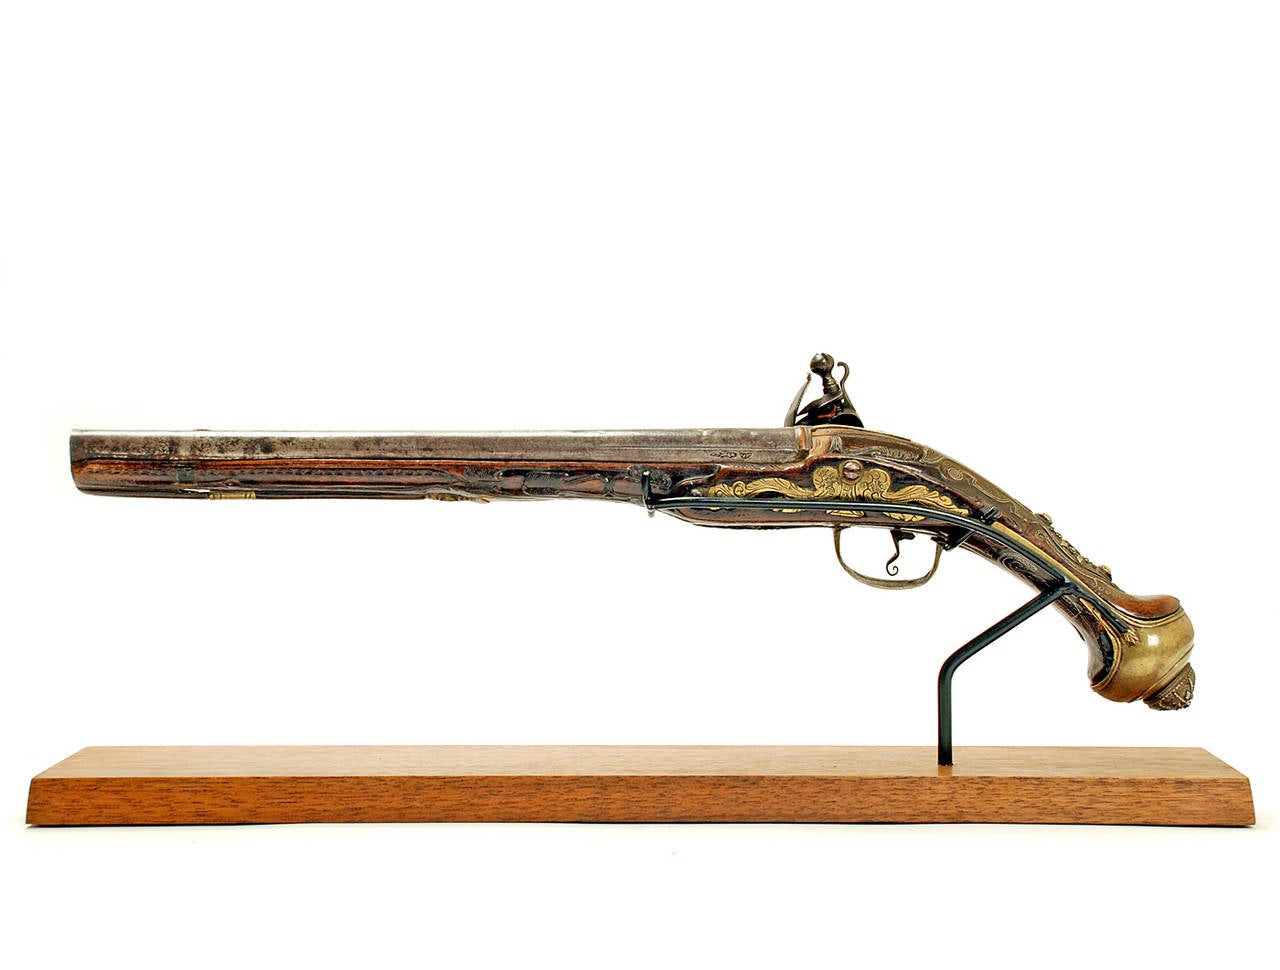 Outstanding early 19th century Ottoman flintlock pistol with various maker's marks in Arabic. Beautiful hand chased and engraved lock-plate. The stock with vertical bands of intricate silver inlay together with brass, bone and onyx decorations on